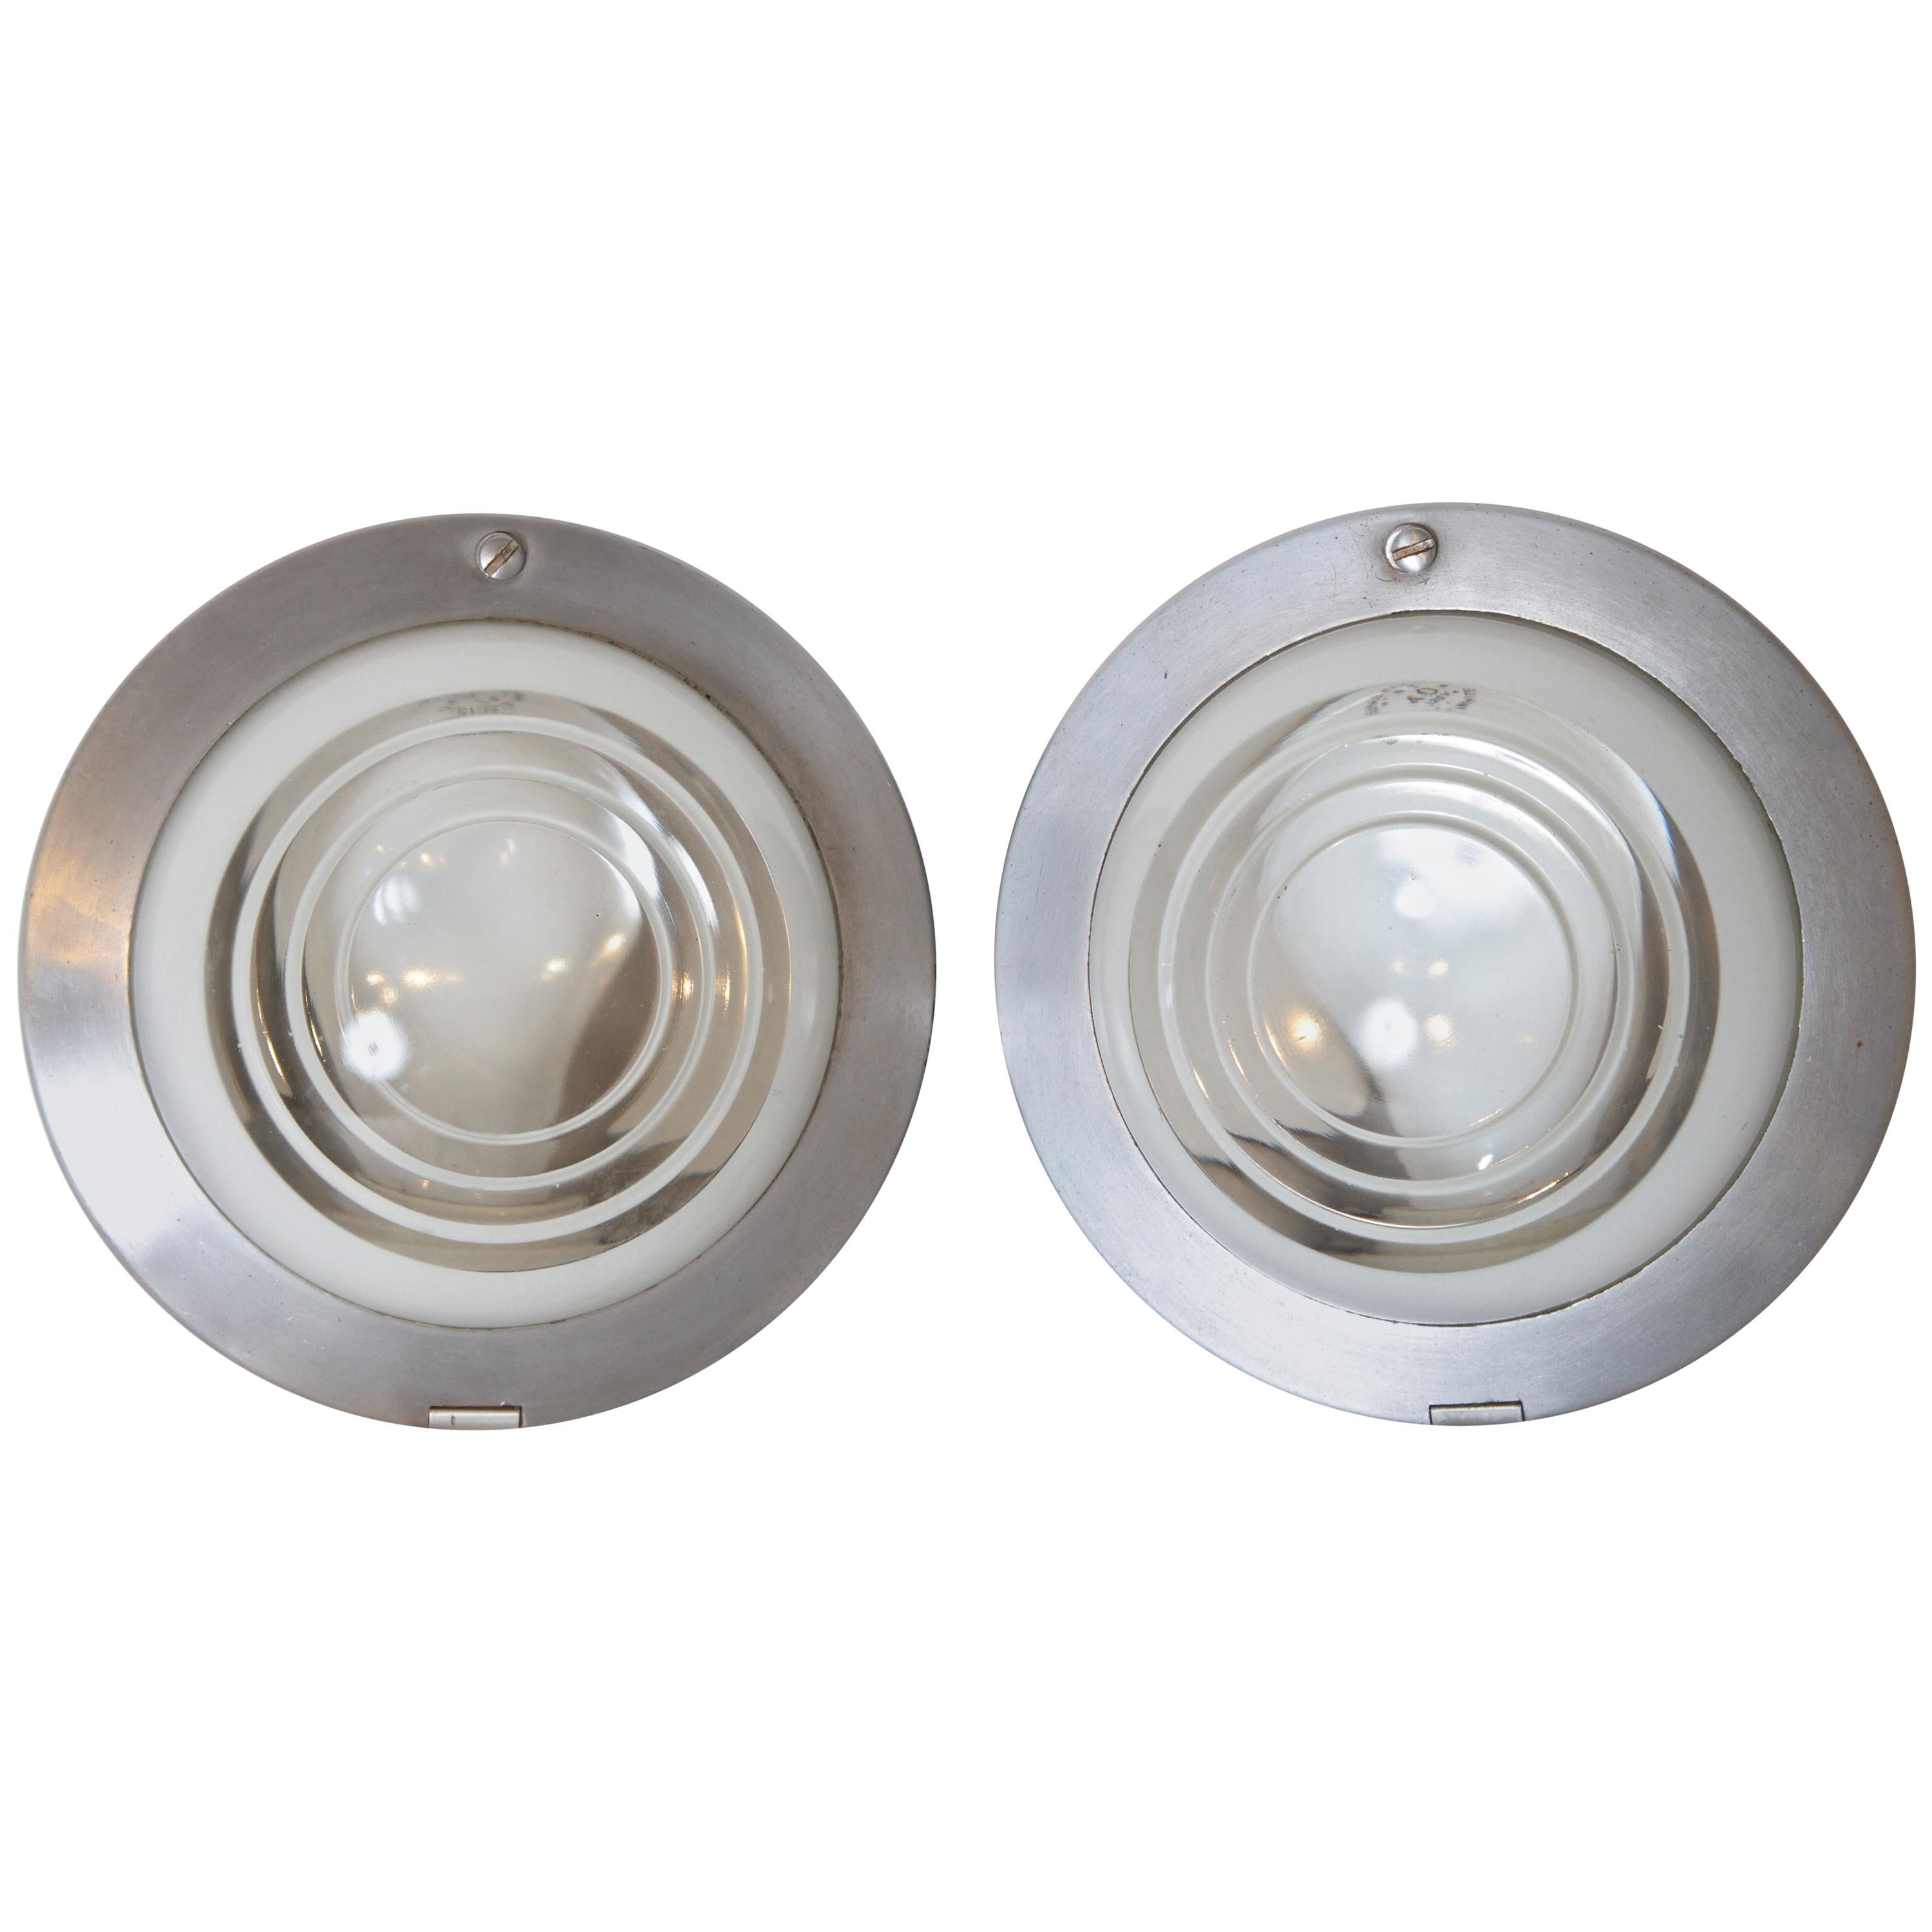 Machine Age Art Deco 20th Century Limited Henry Dreyfuss Fixtures Pair Recessed For Sale